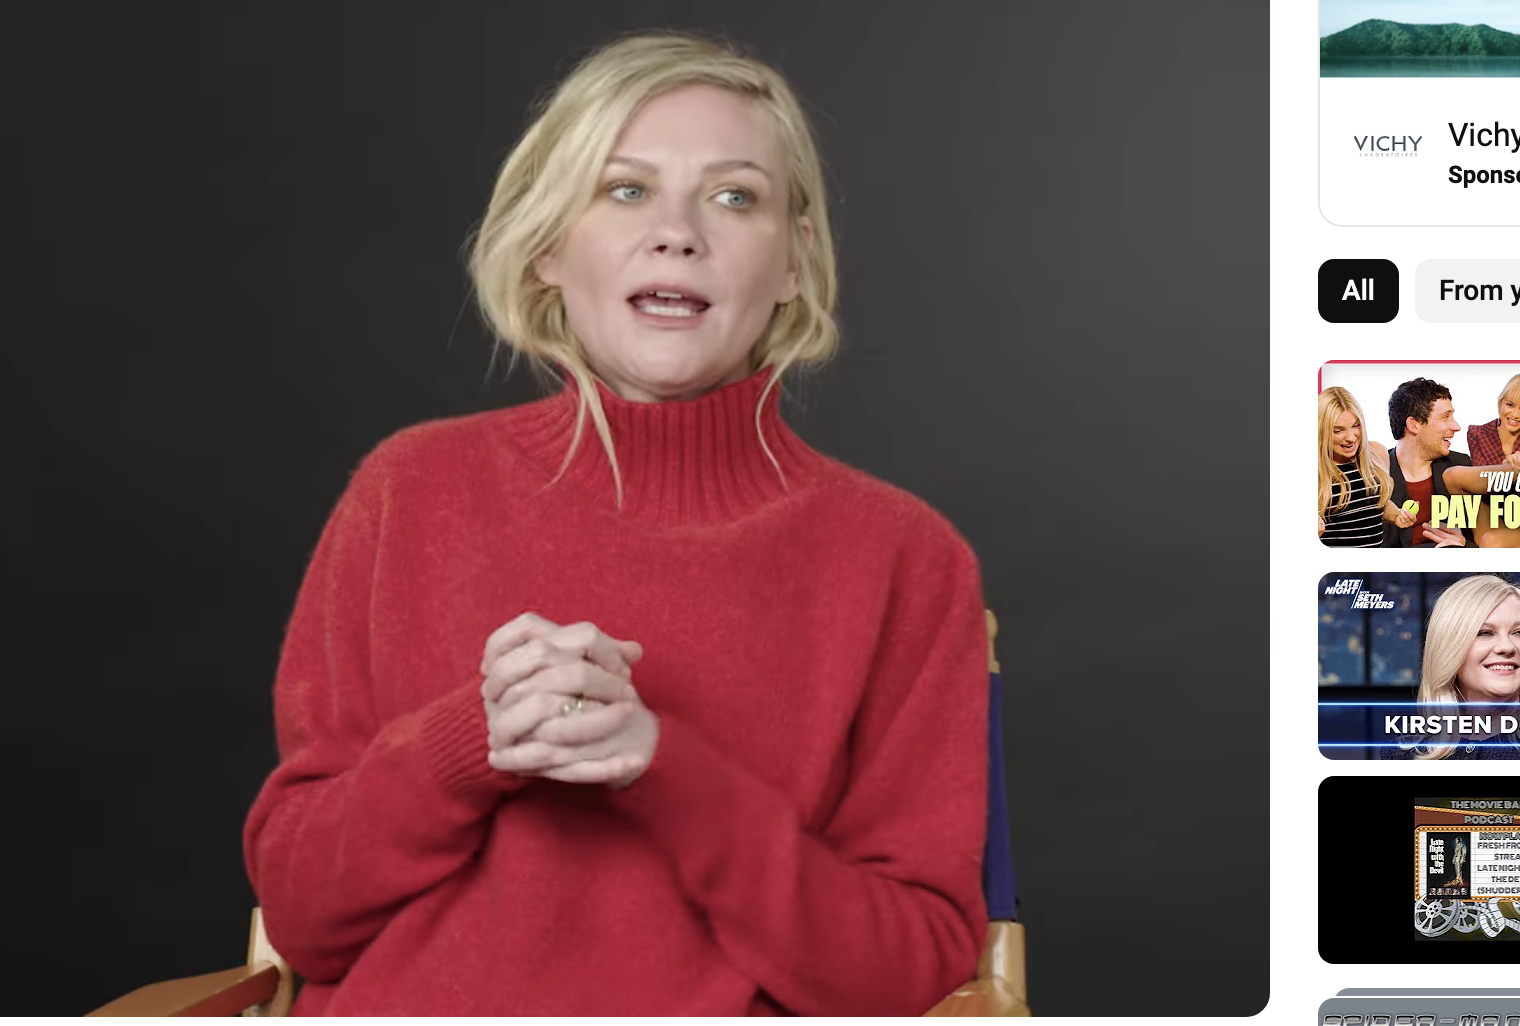 Kristen Dunst breaks down her most iconic roles in a video interview